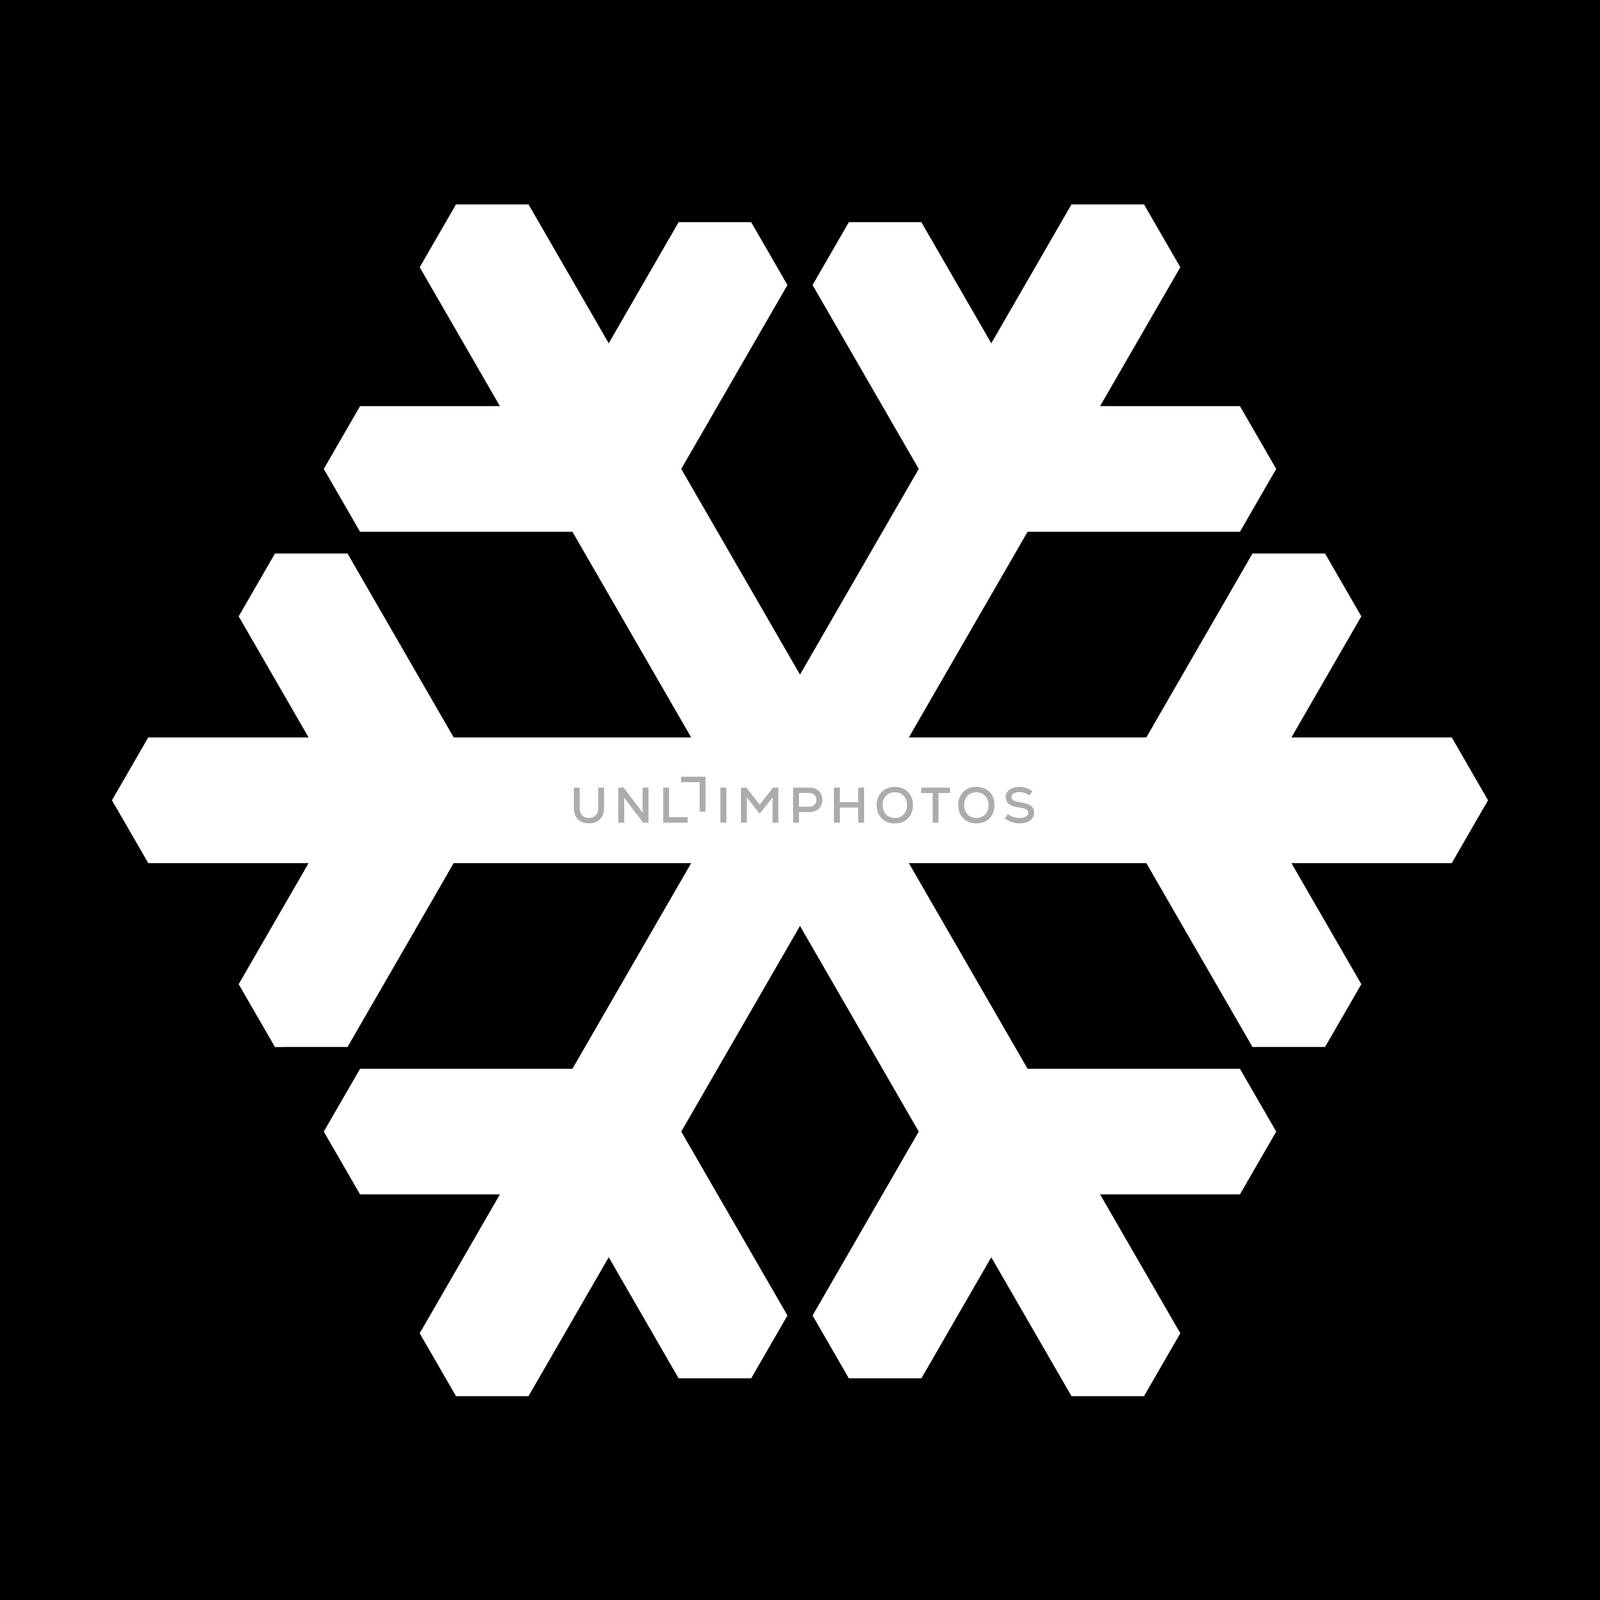 Snowflake. Black and white graphical symbol.